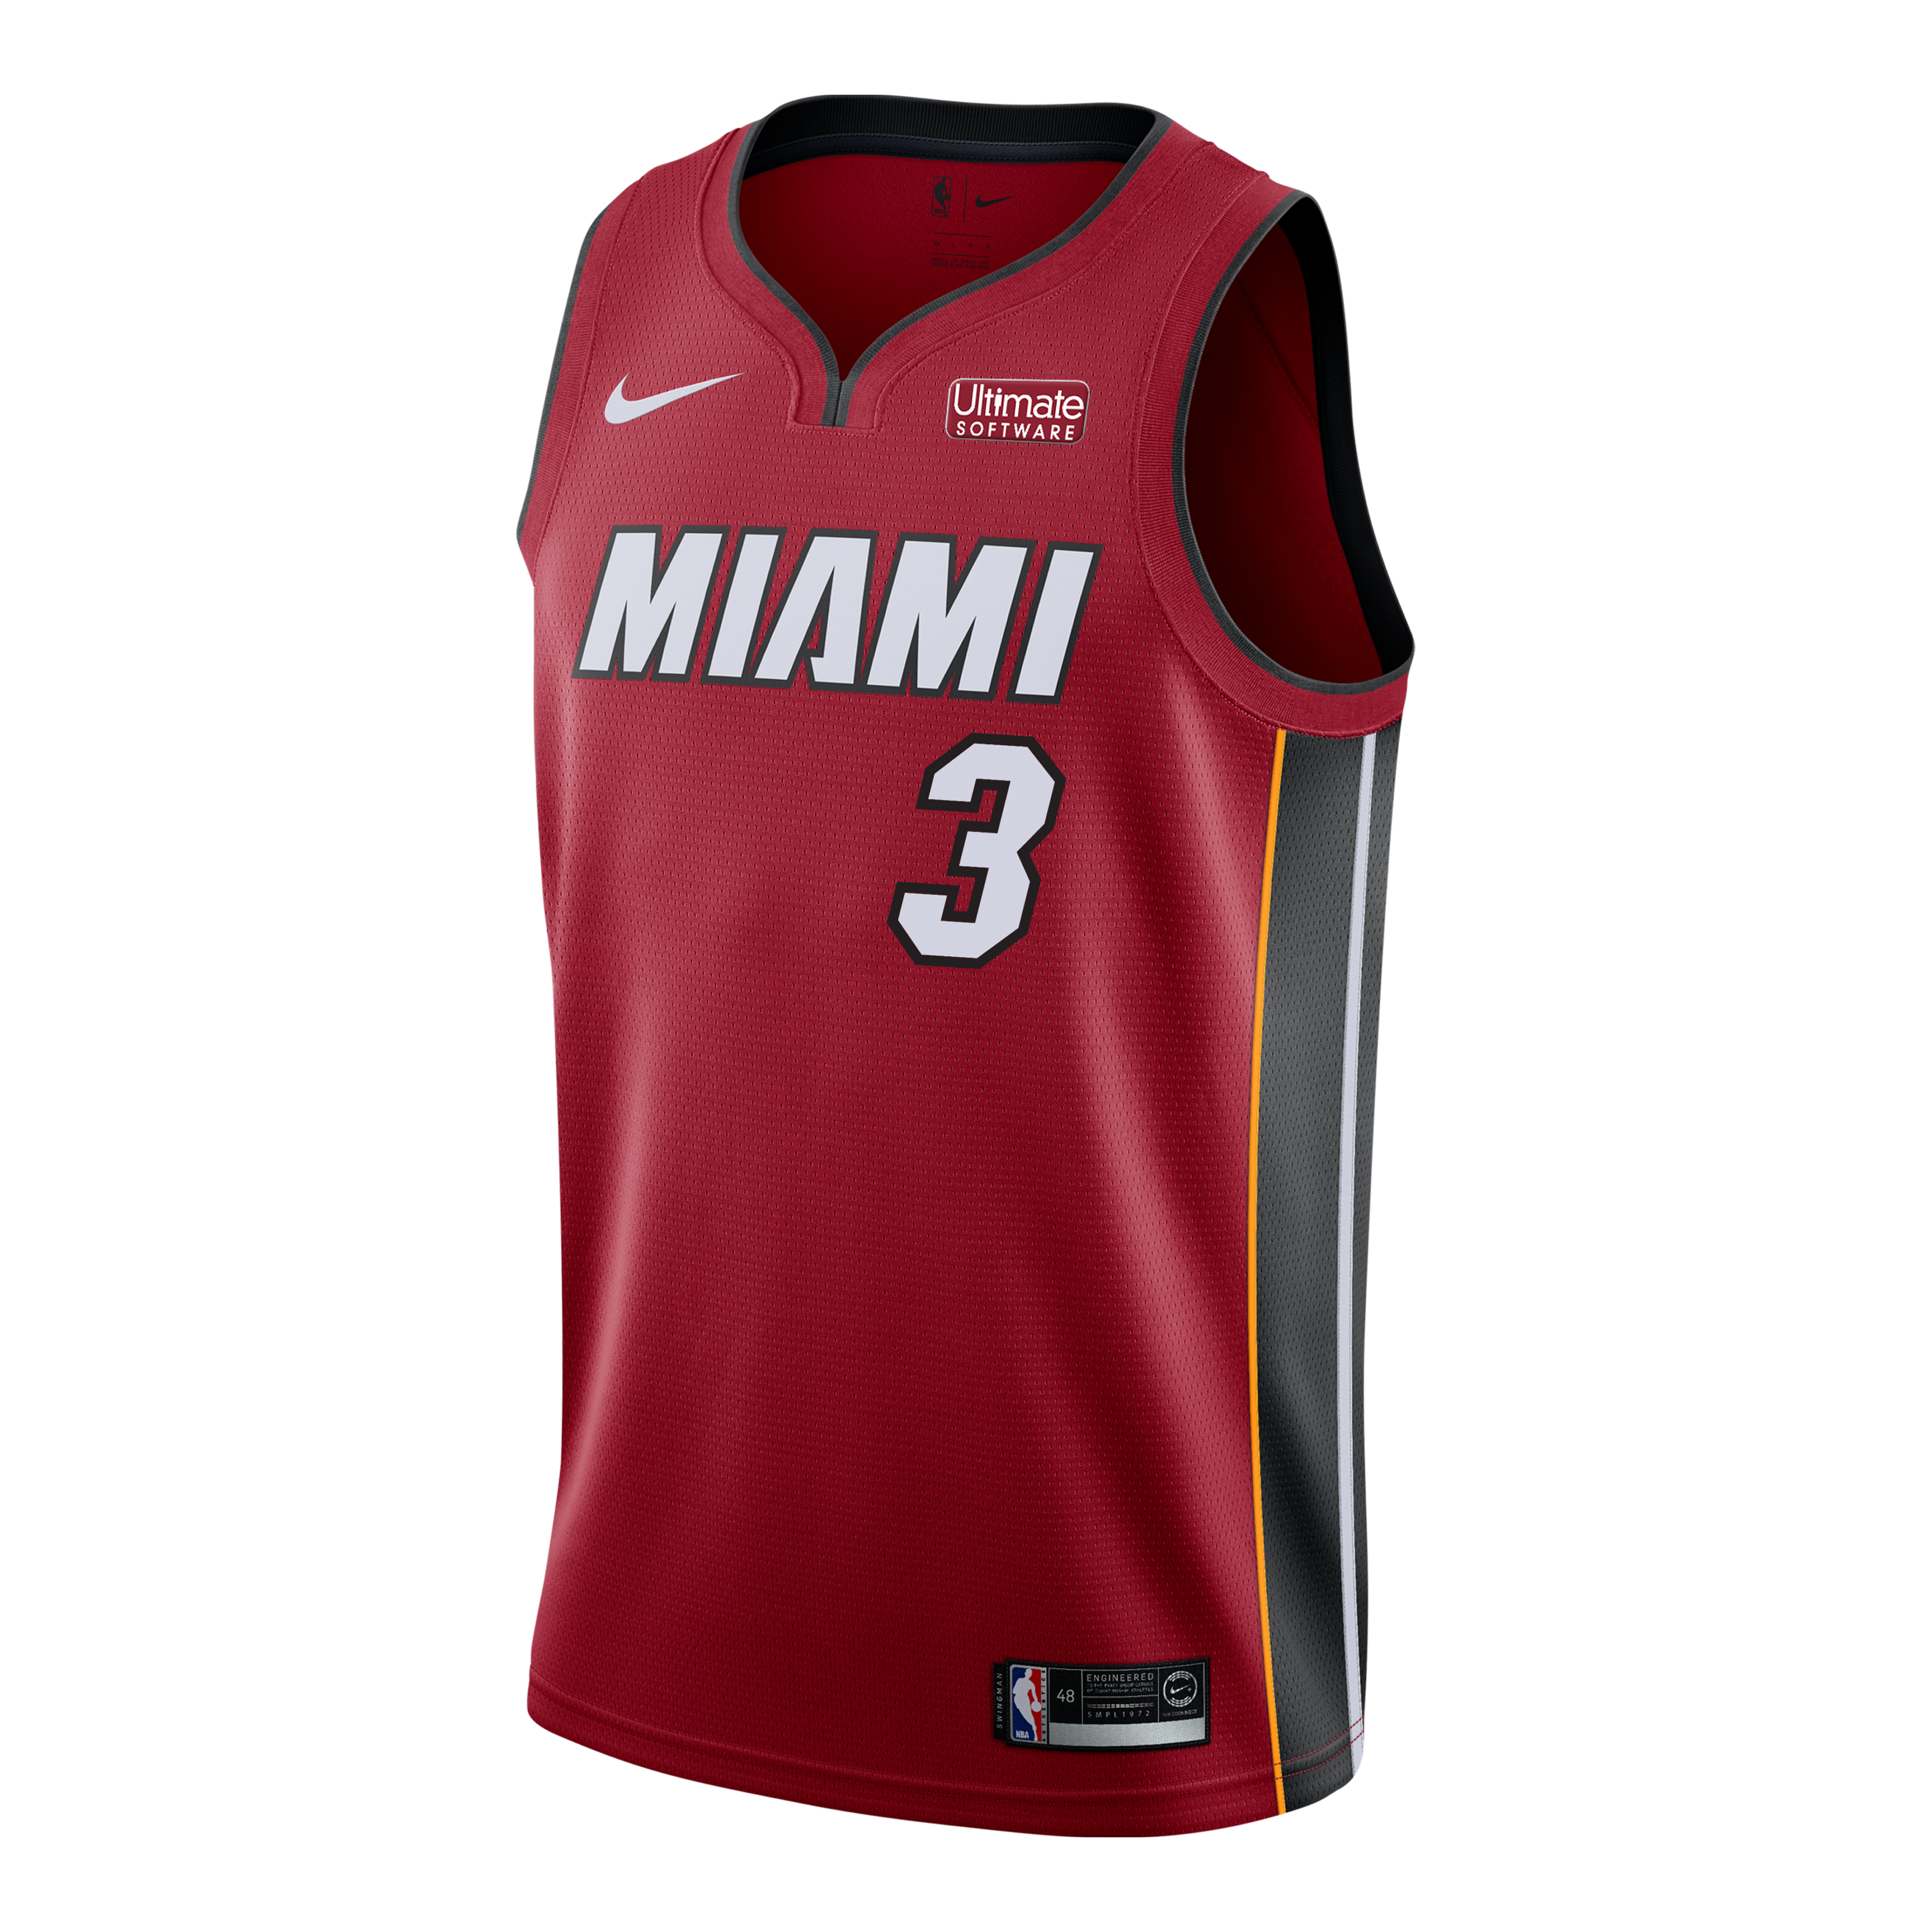 red nike jersey